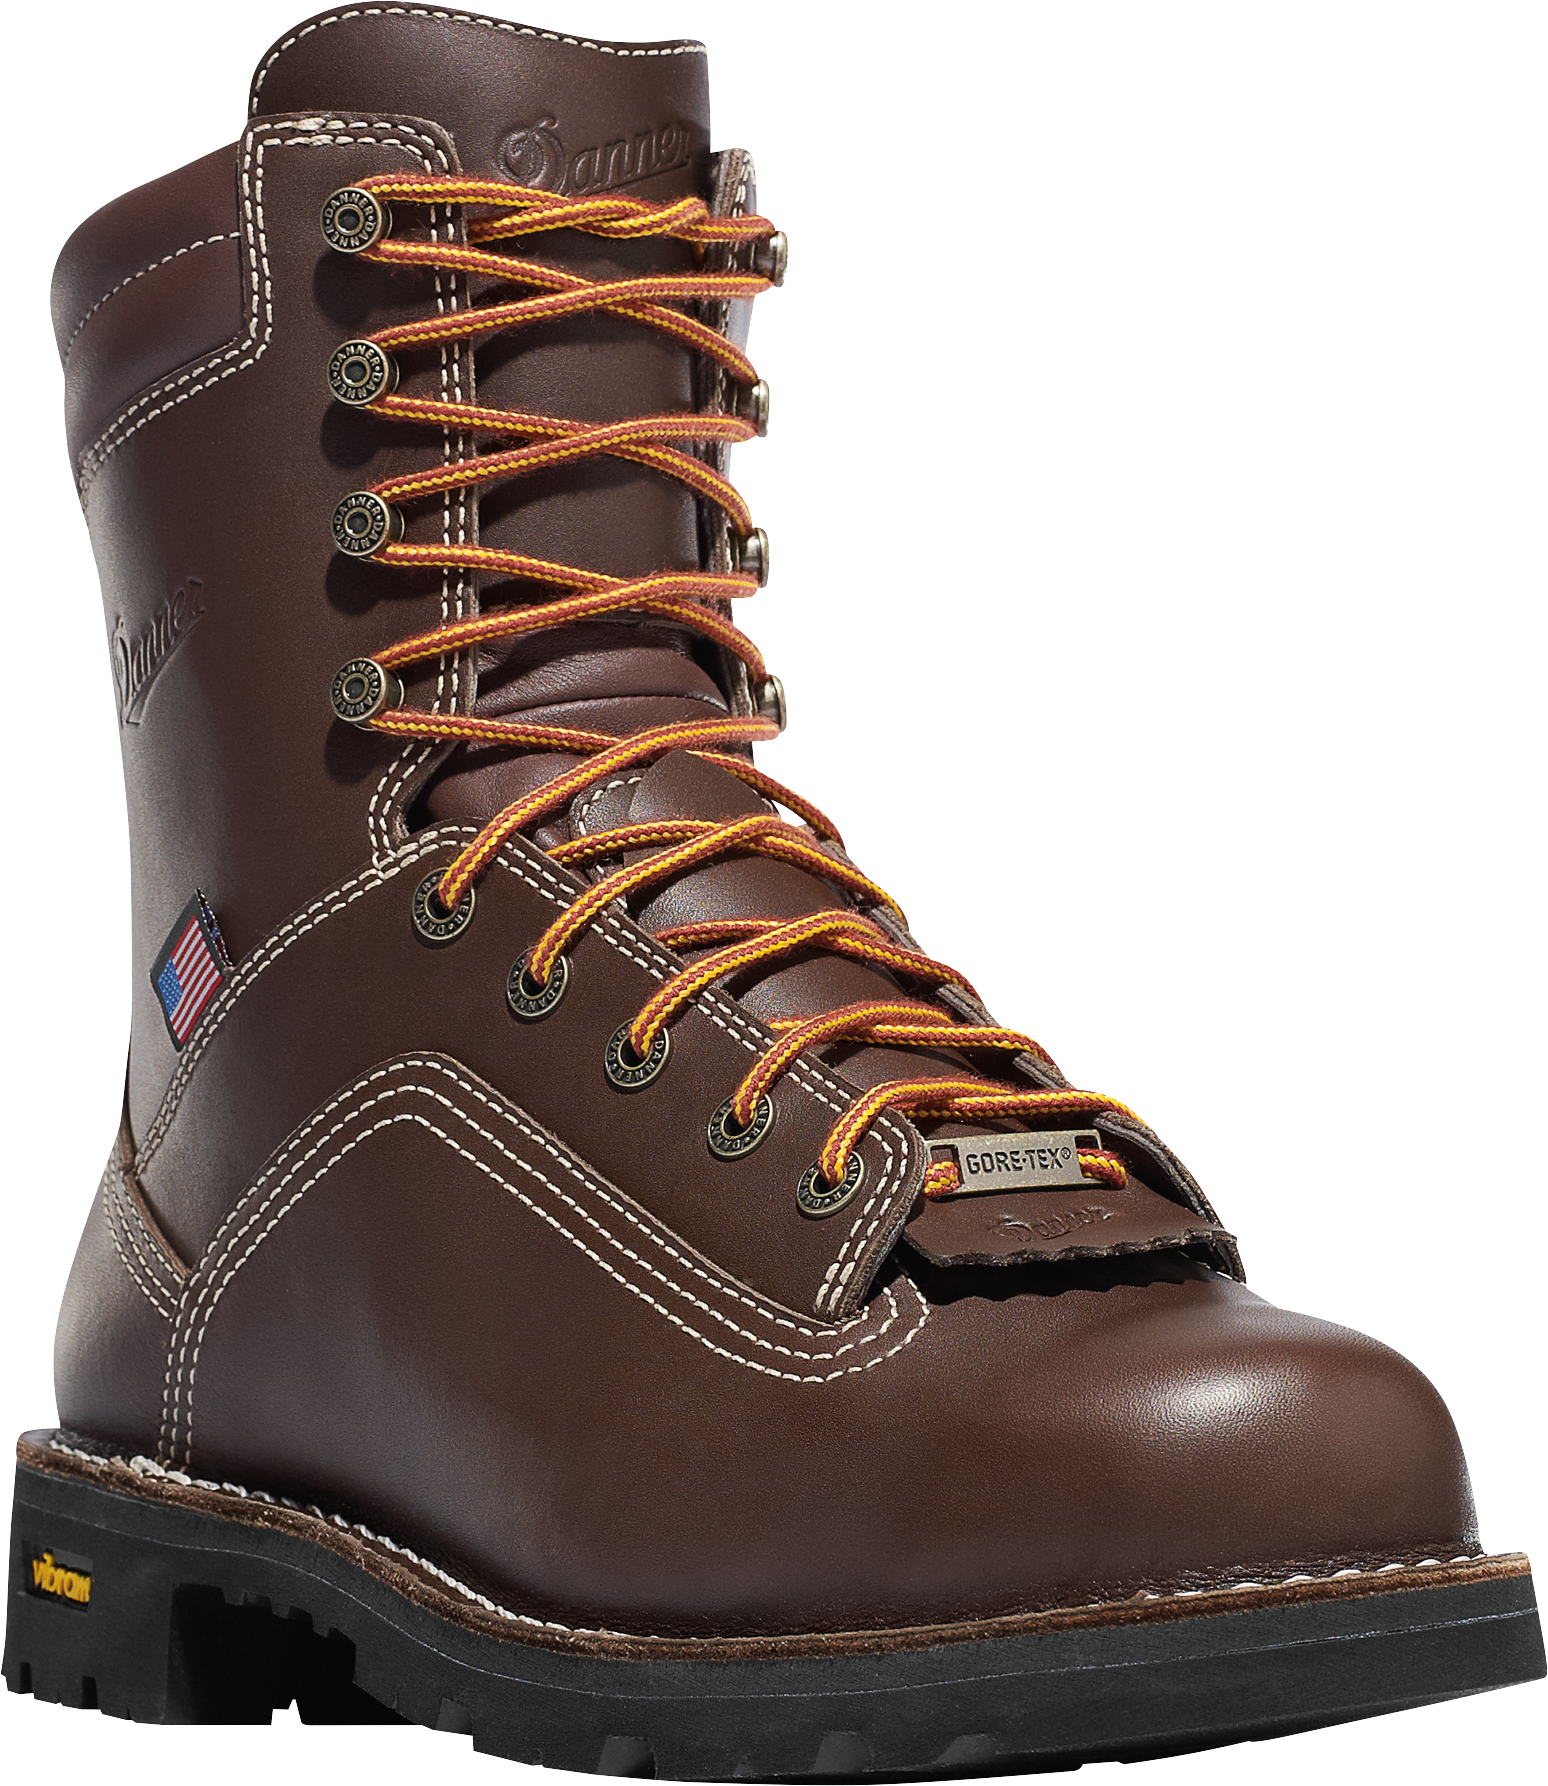 Danner Quarry USA Brown GORE-TEX Alloy Toe Work Boots for Men - Brown - 8.5W